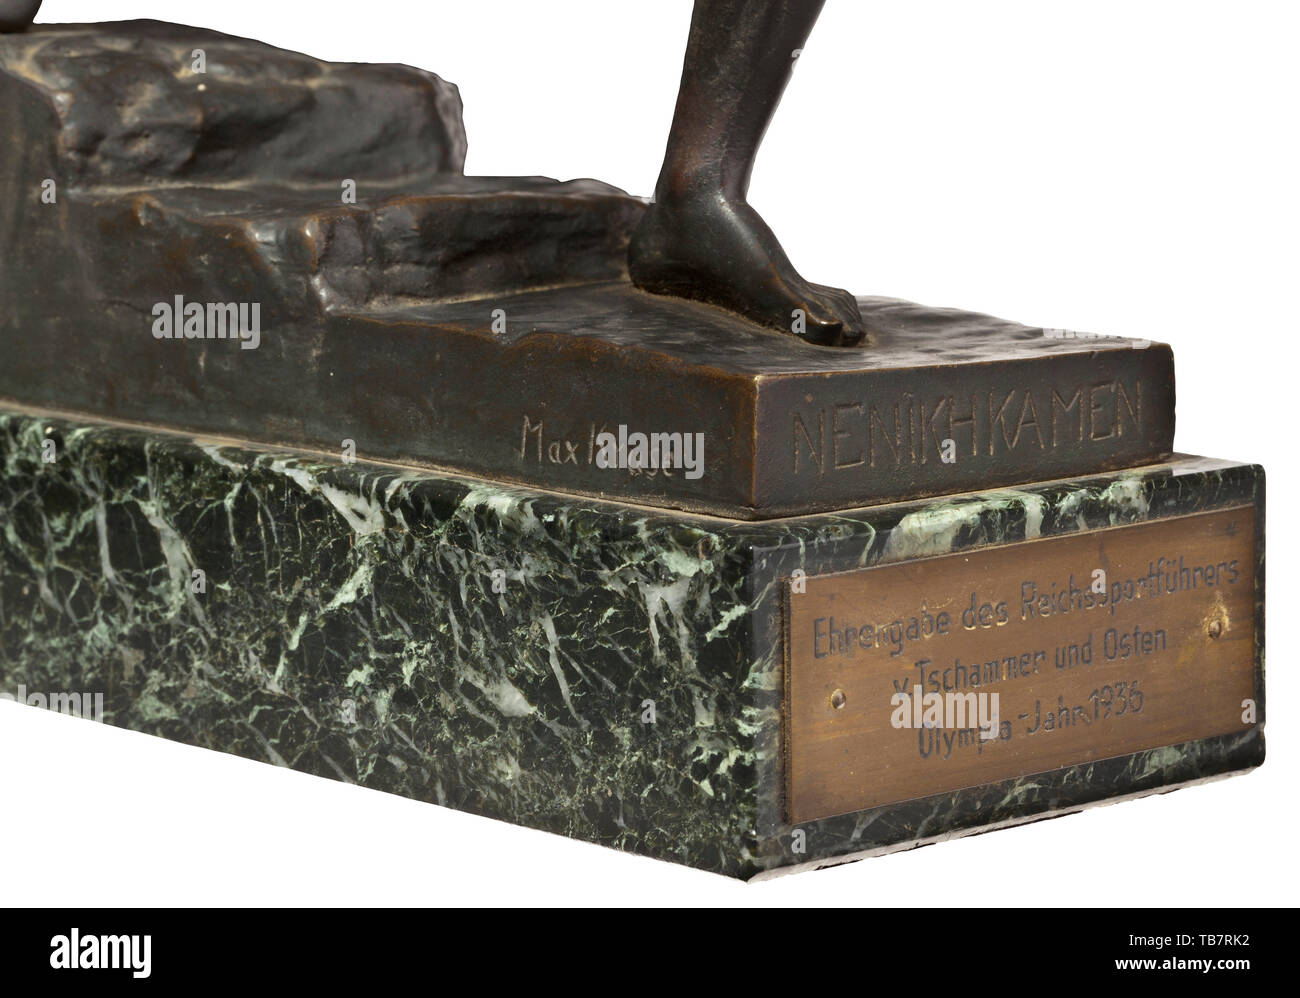 Max Kruse (1854 - 1942) - The Messenger of Marathon, honorary endowment from the Reichssportführer von Tschammer und Osten for the Olympic Games 1936, Bronze, black-brown patinated (rubbed, laurel branch missing), the base with the artist's signature and inscription 'NENIKHKAMEN' and foundry signature 'Gladenbeck GmbH', on green marble base with dedication plaque (tr.) 'Honorary Endowment from the Reichssportführer v. Tschammer und Osten / Olympia Year 1936' (height ca. 37 cm). With a black and white photograph in old frame, handwritten on the mo, Additional-Rights-Clearance-Info-Not-Available Stock Photo